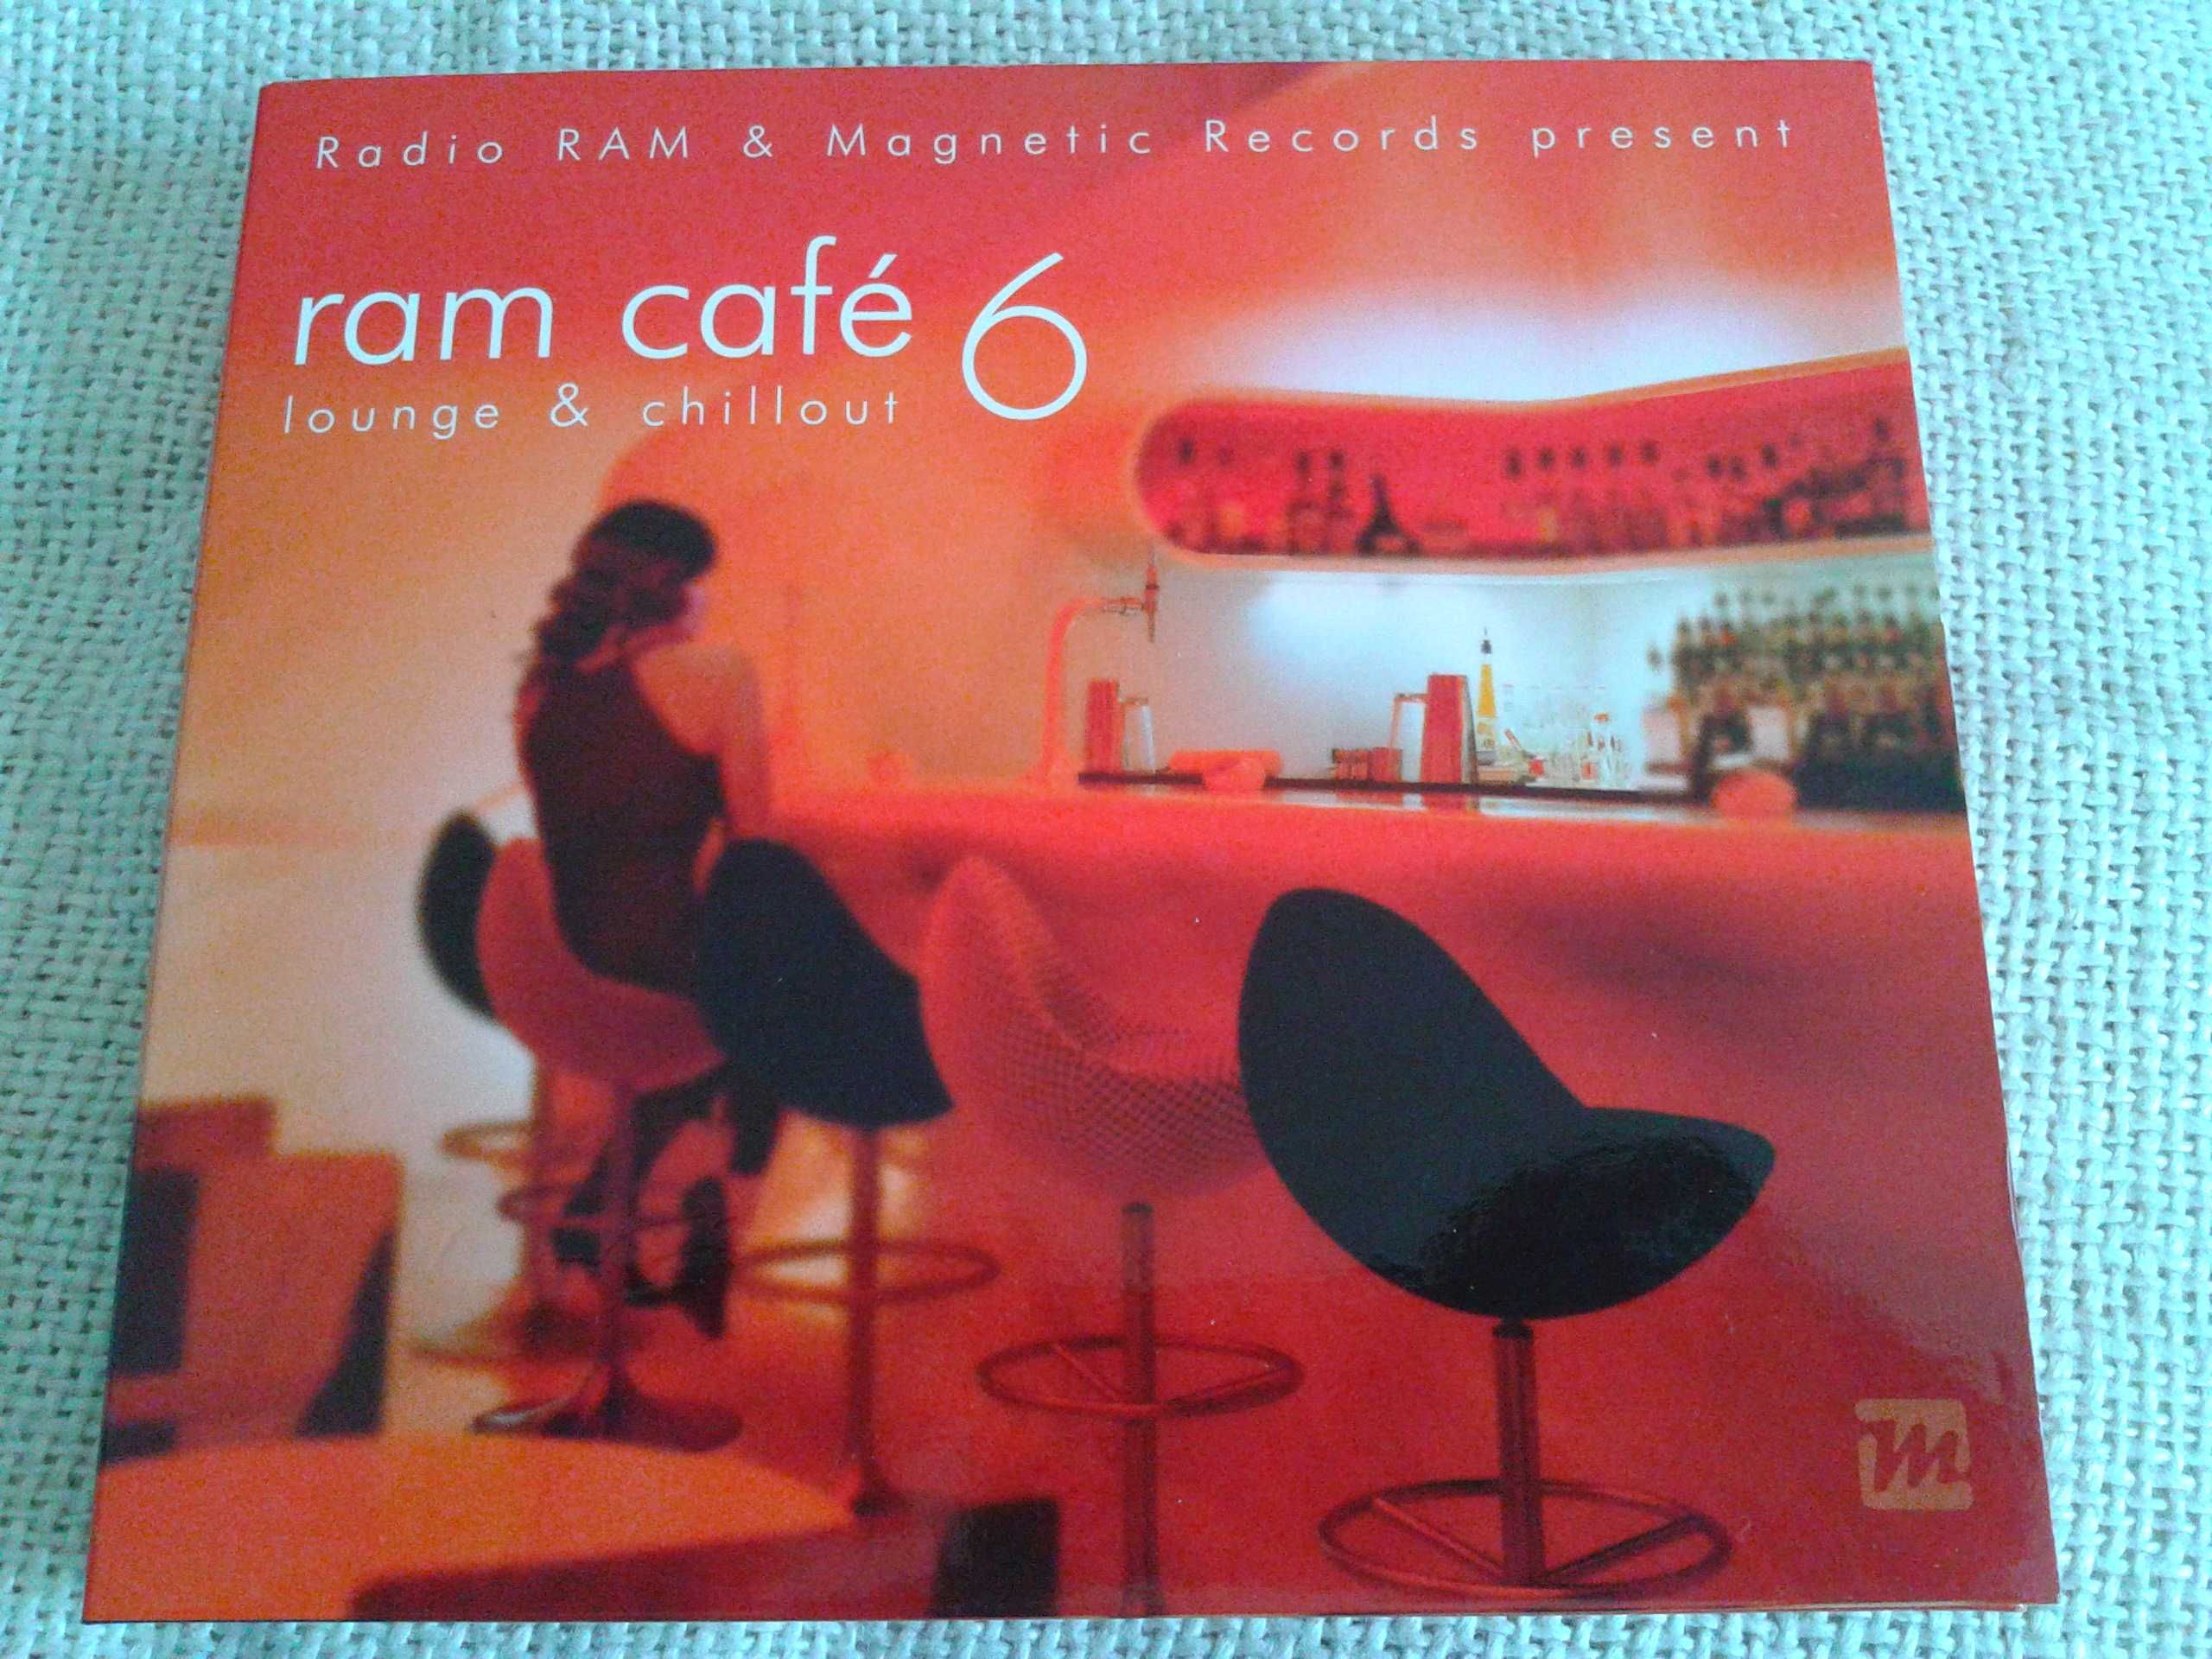 Ram Cafe 6 , Lounge & Chillout  CD